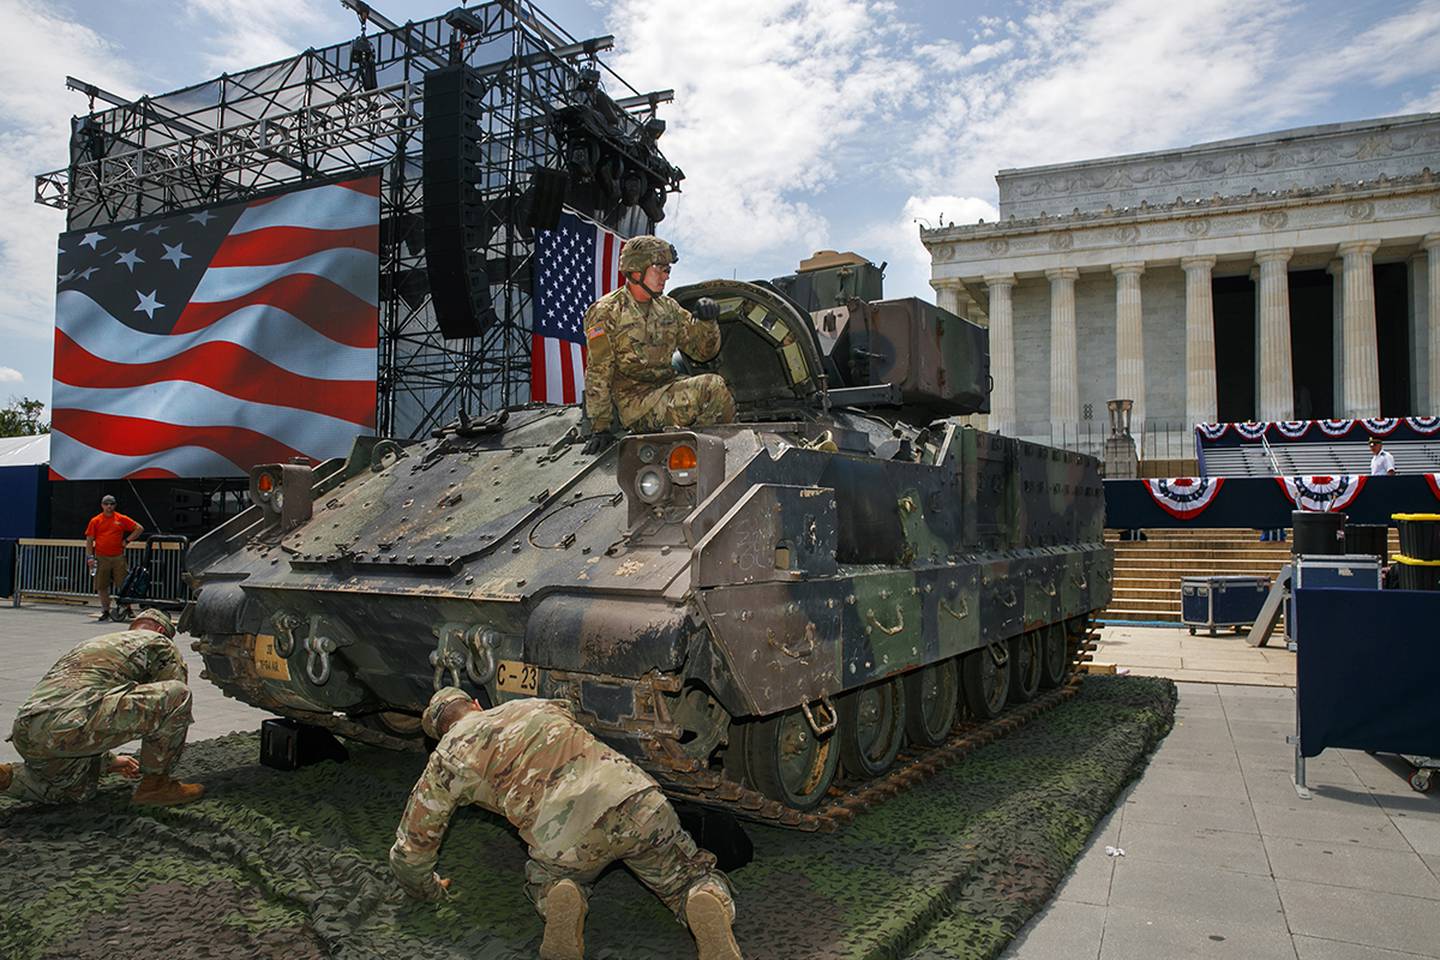 An Army soldier hops out of a Bradley Fighting Vehicle after moving it into place by the Lincoln Memorial, Wednesday, July 3, 2019, in Washington, ahead of planned Fourth of July festivities with President Donald Trump.